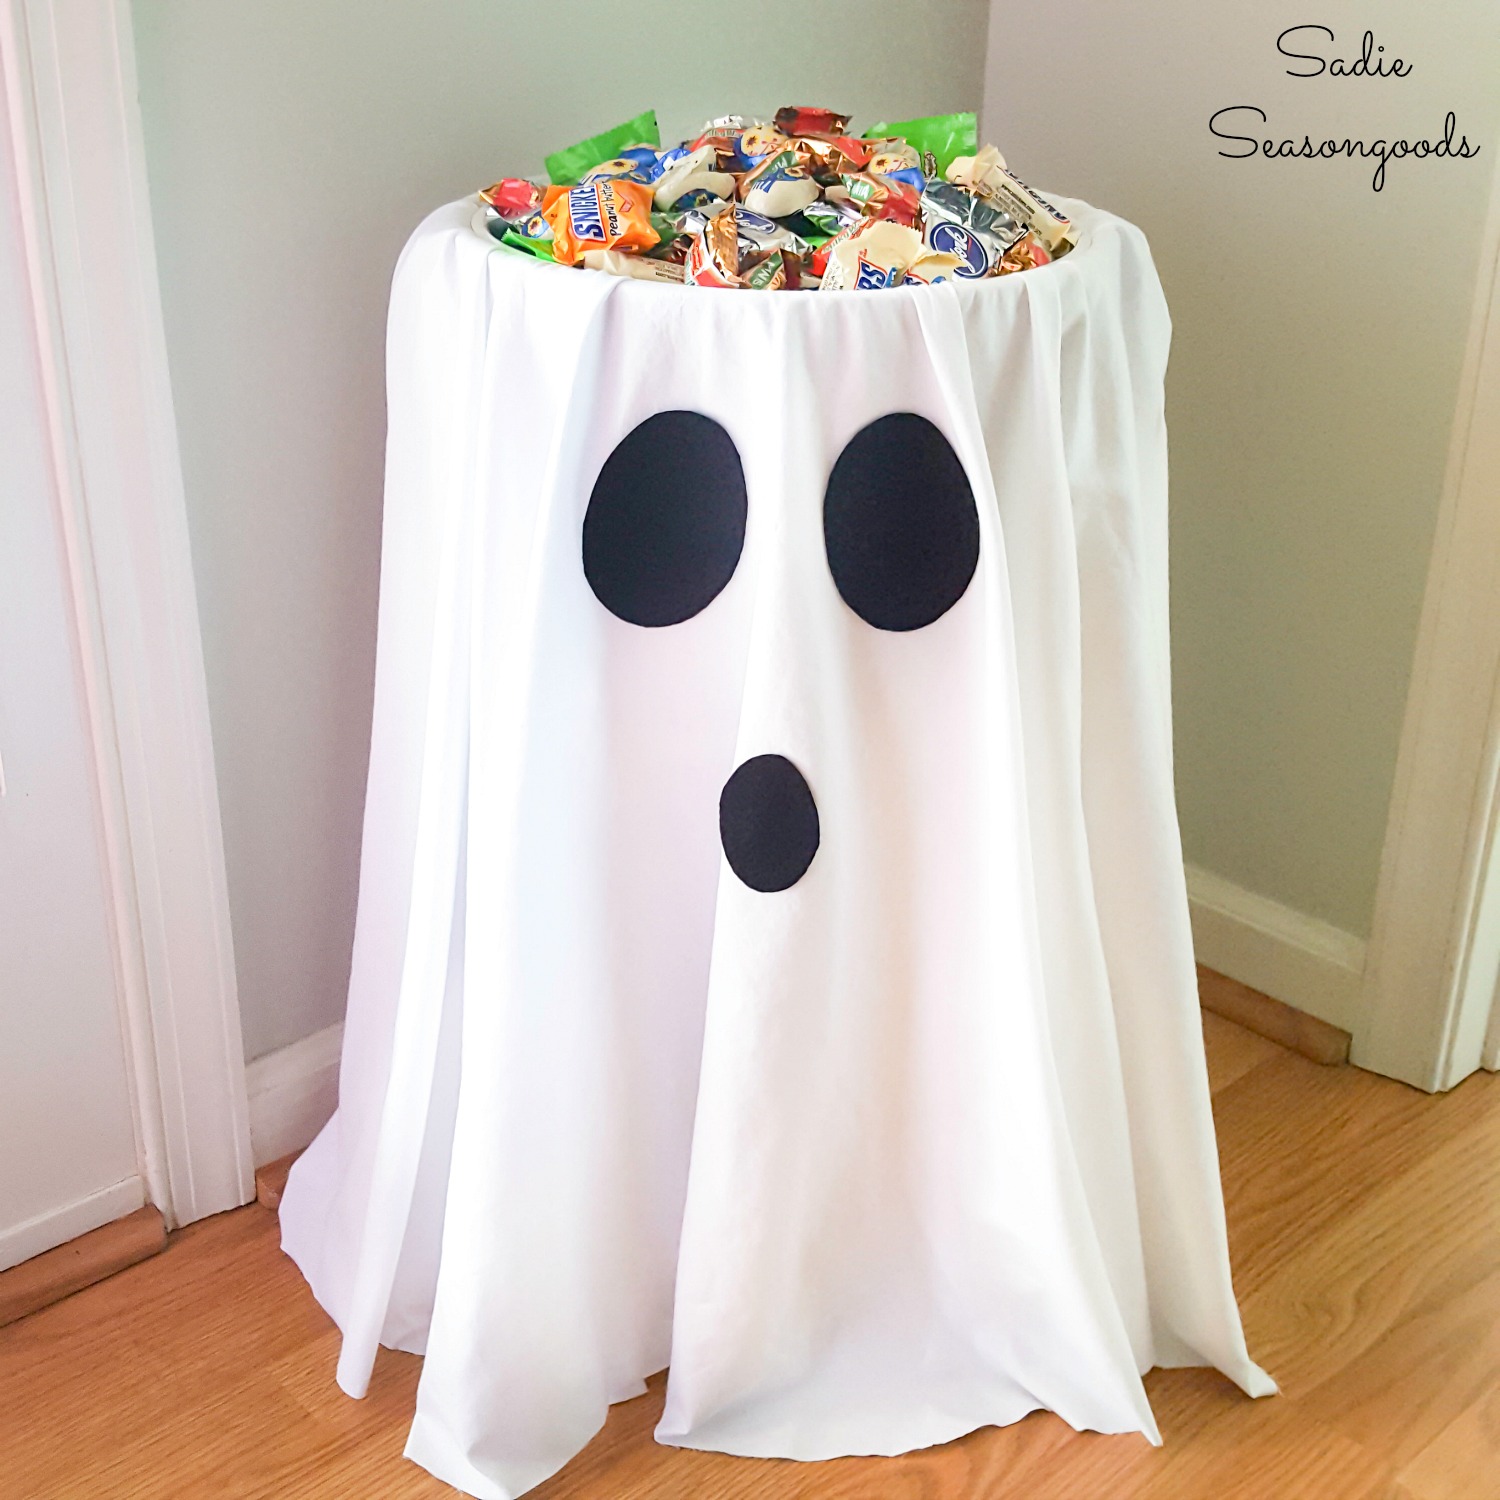 https://www.sadieseasongoods.com/wp-content/uploads/2016/10/Halloween-trick-or-treat-ideas-with-a-candy-bowl-holder.jpg